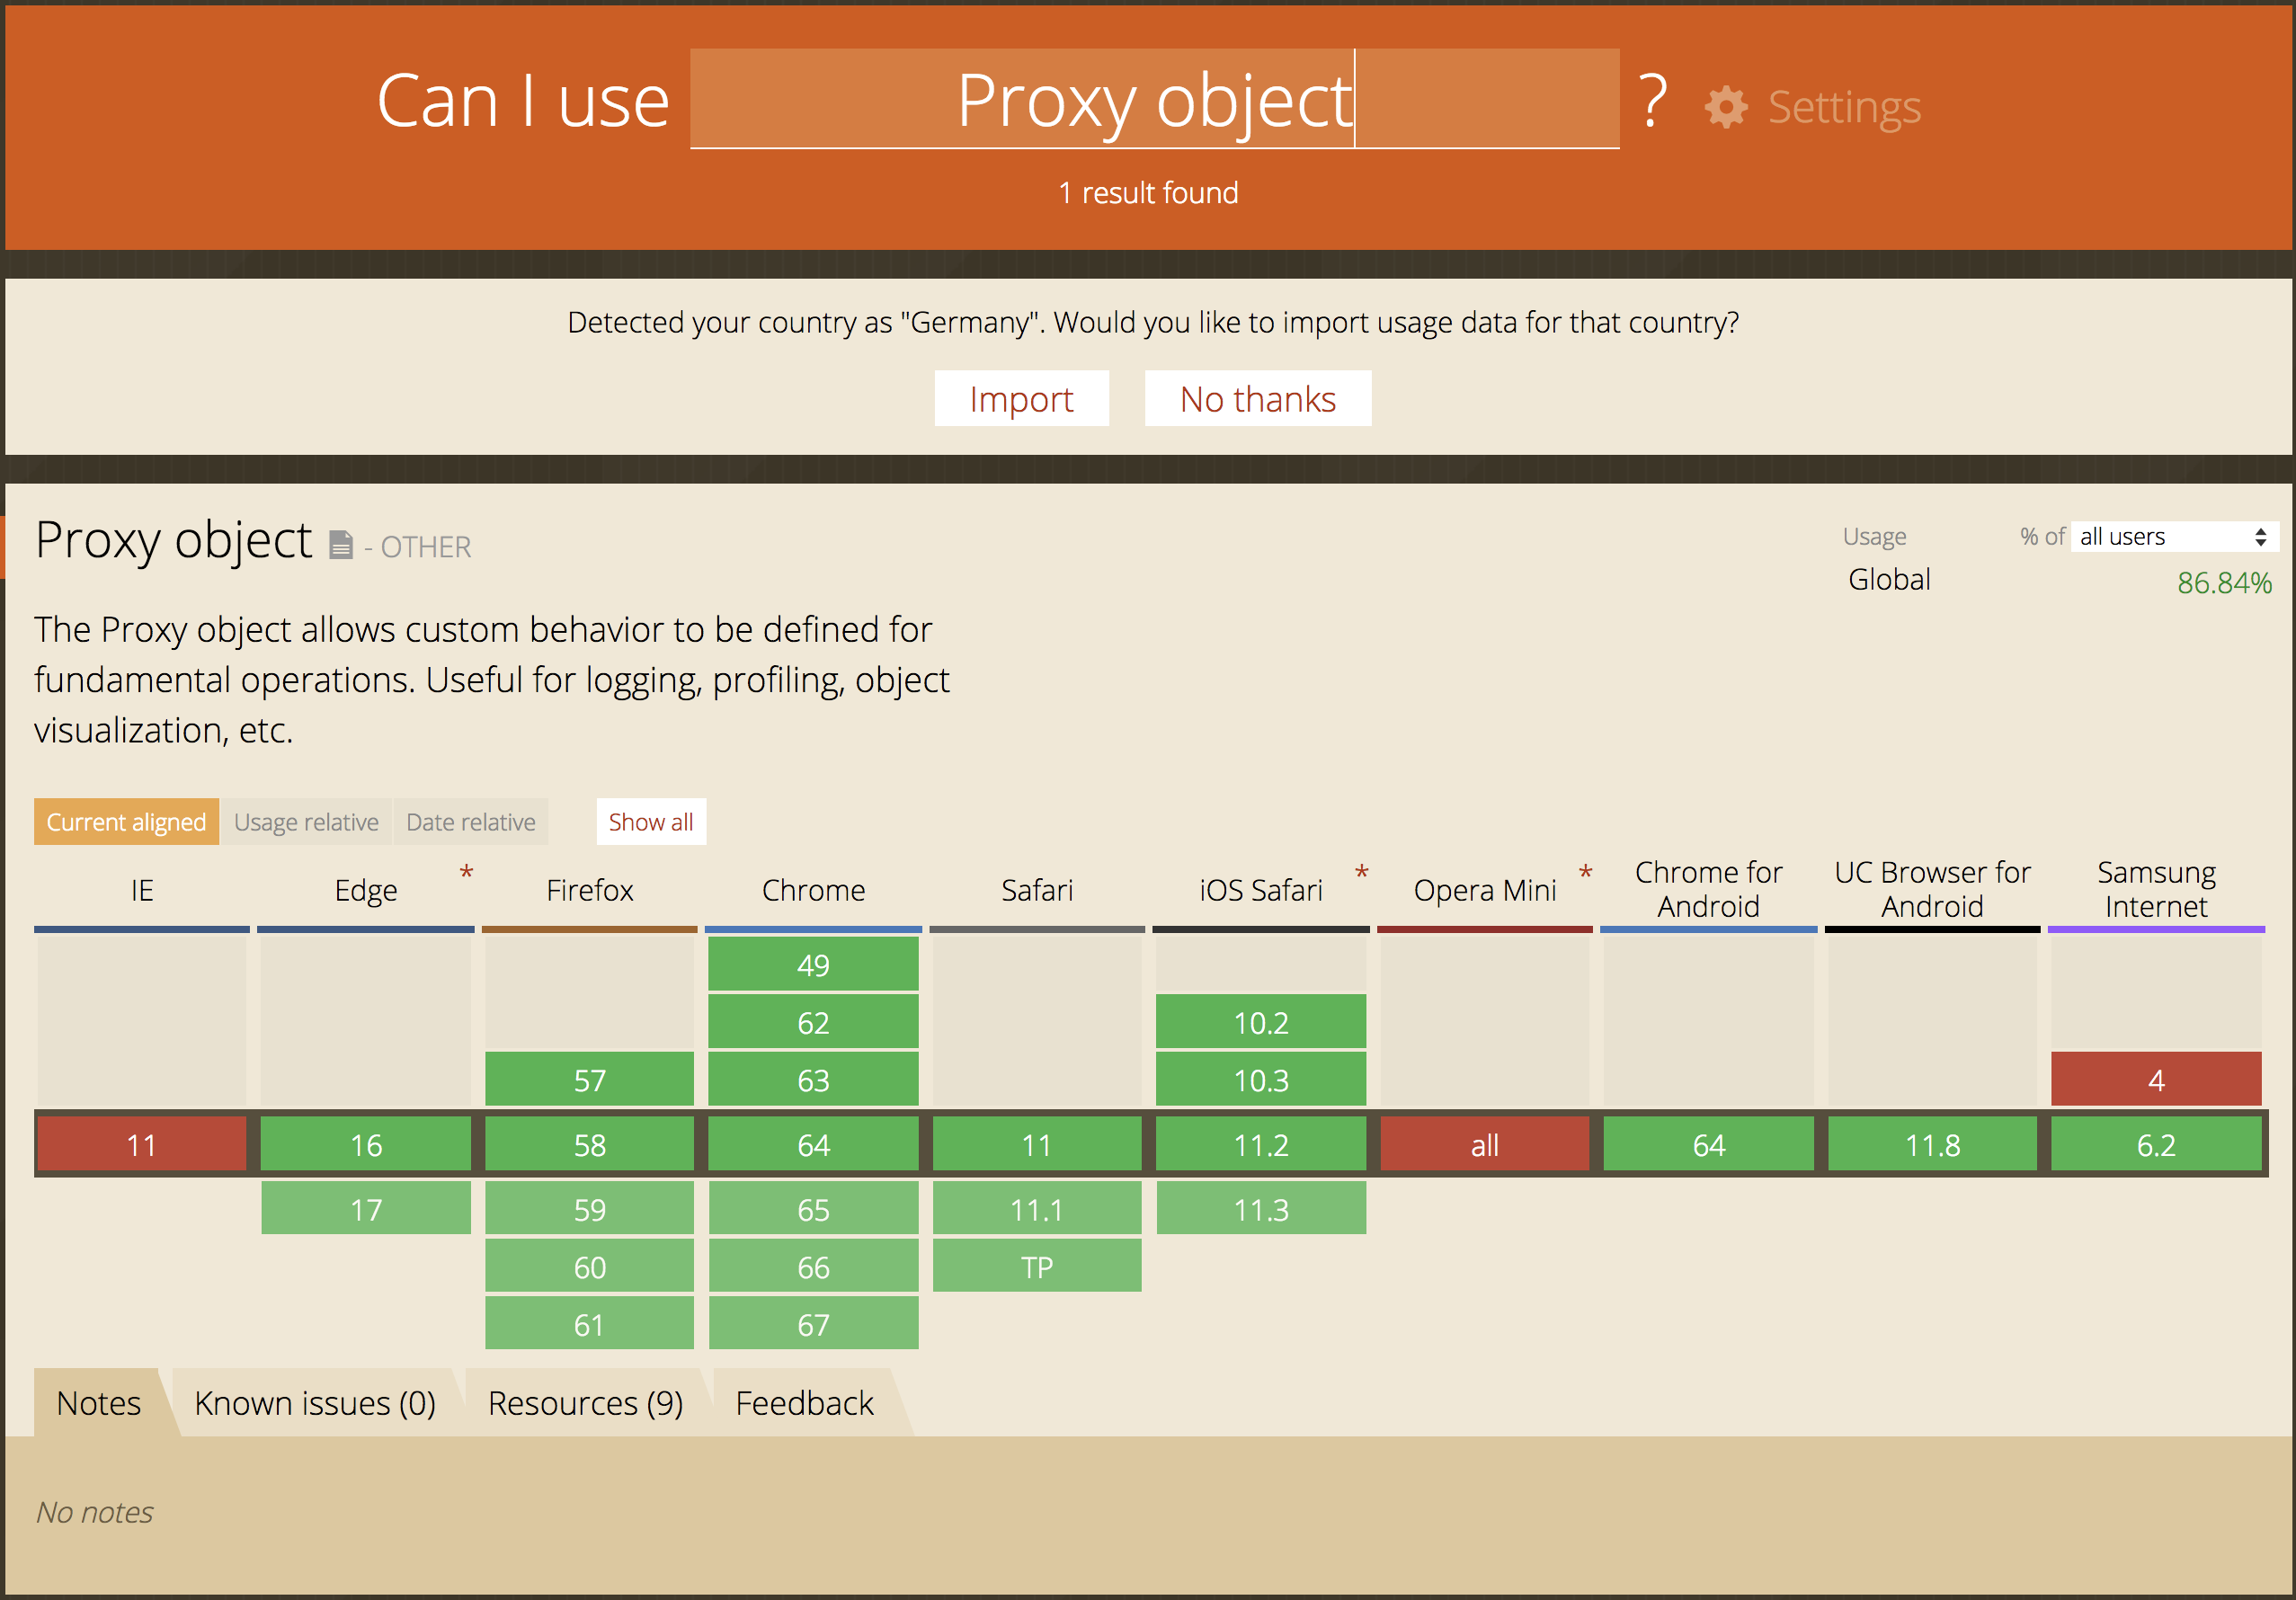 Proxy object browser support